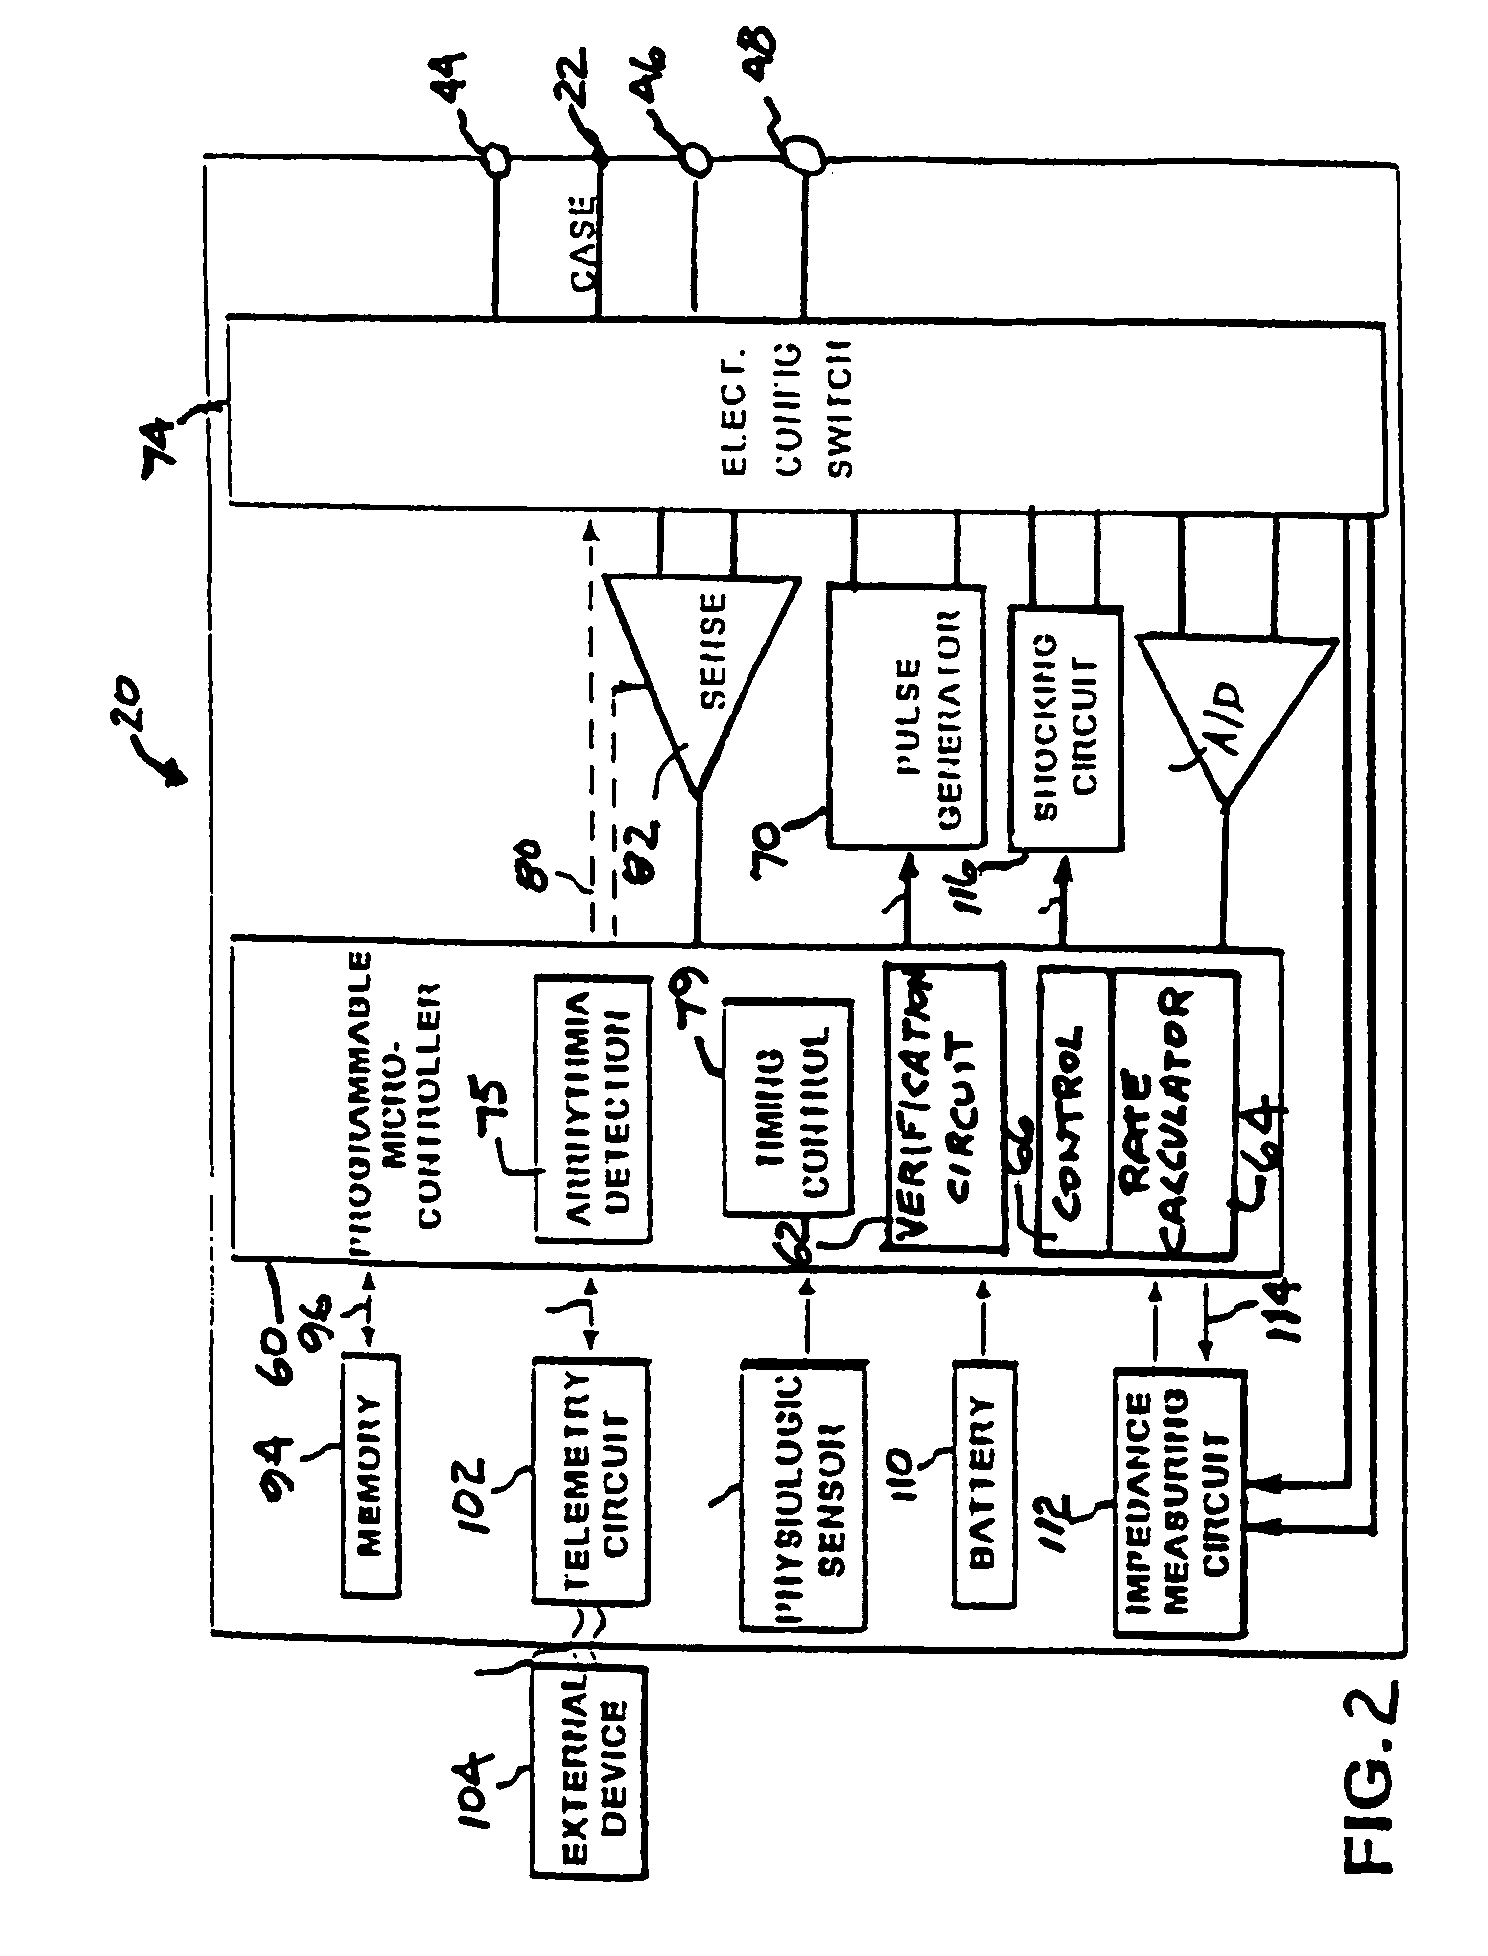 Subcutaneous cardiac stimulation device, system, and method providing accelerated arrhythmia detection verification and transient rate compensation